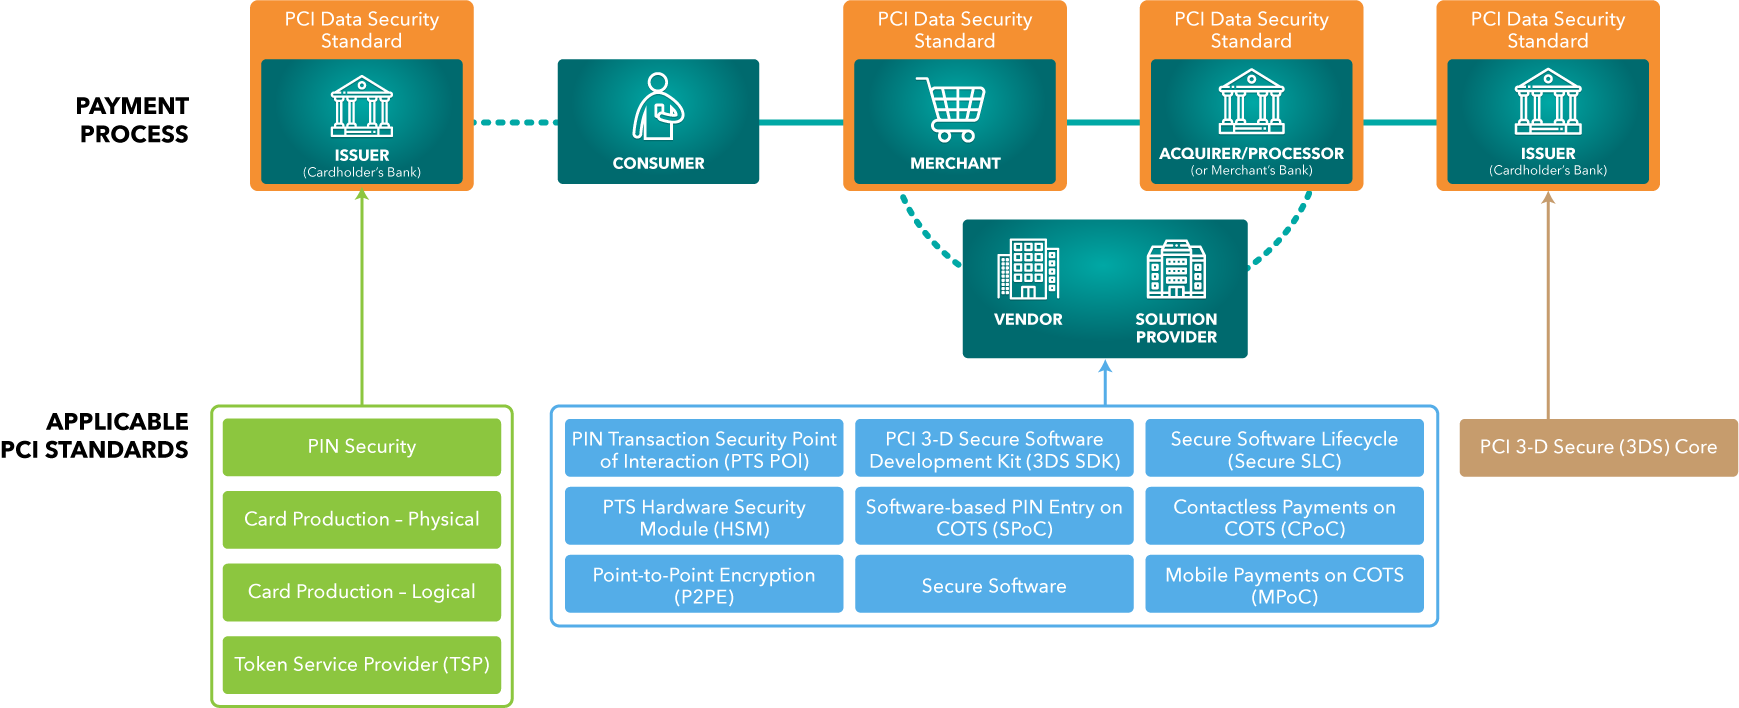 The PCI Security Standards Ecosystem